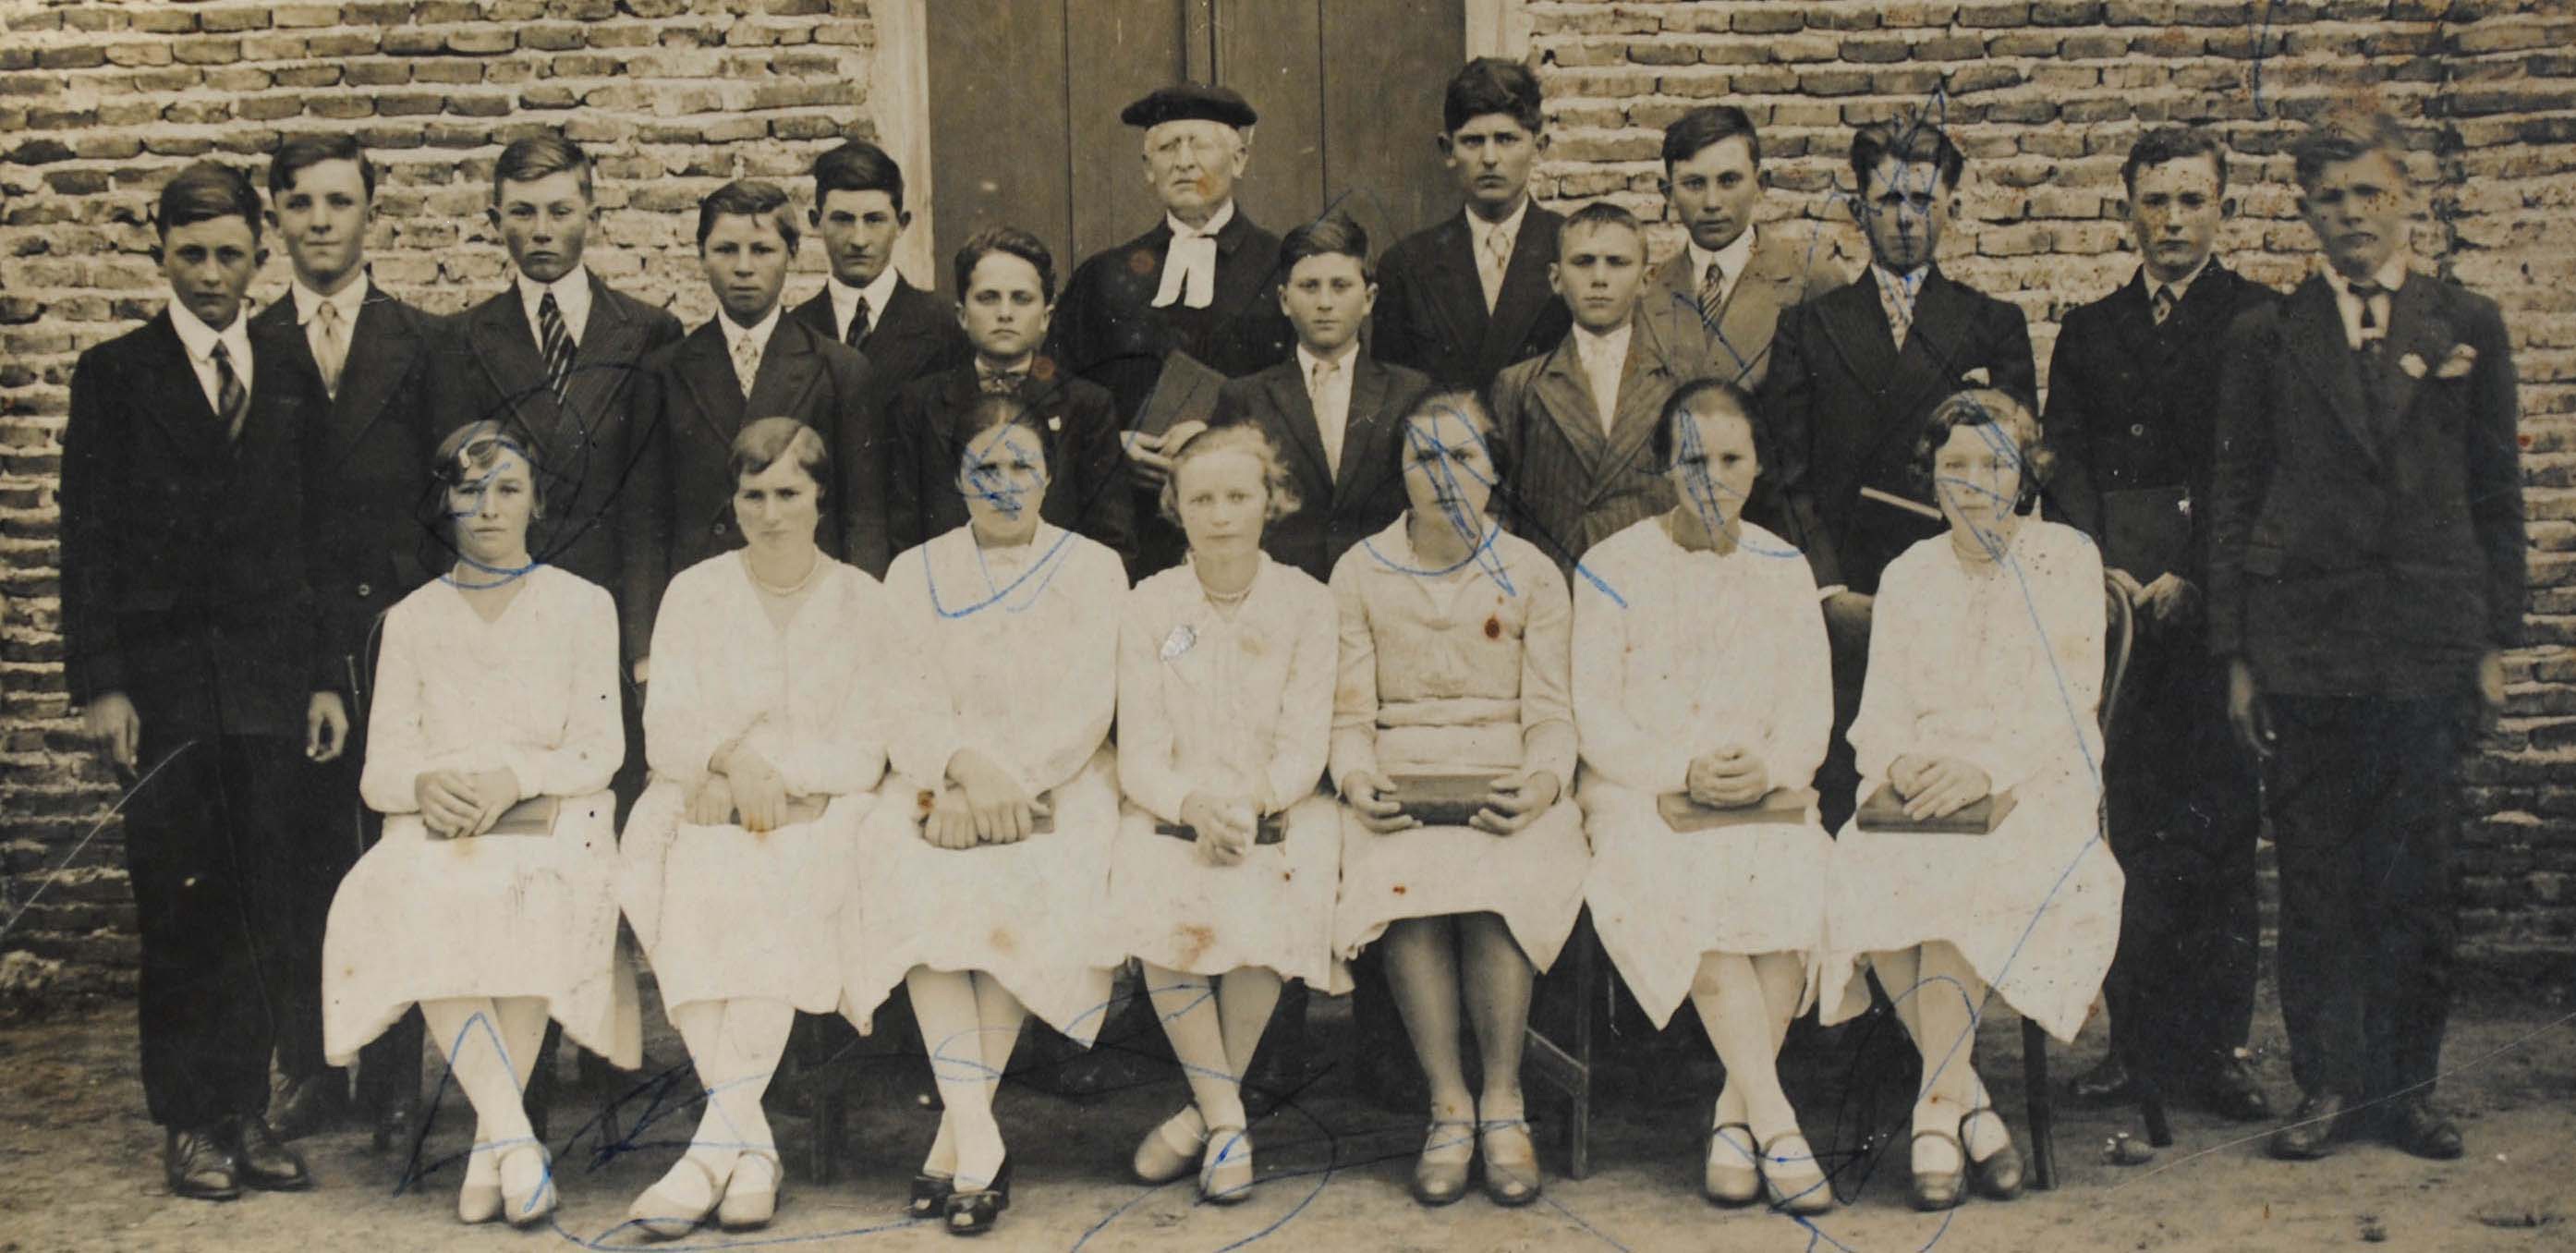 Confirmation class (1931) with Pastor Ernst Lang. Source: Leandro Hildt.